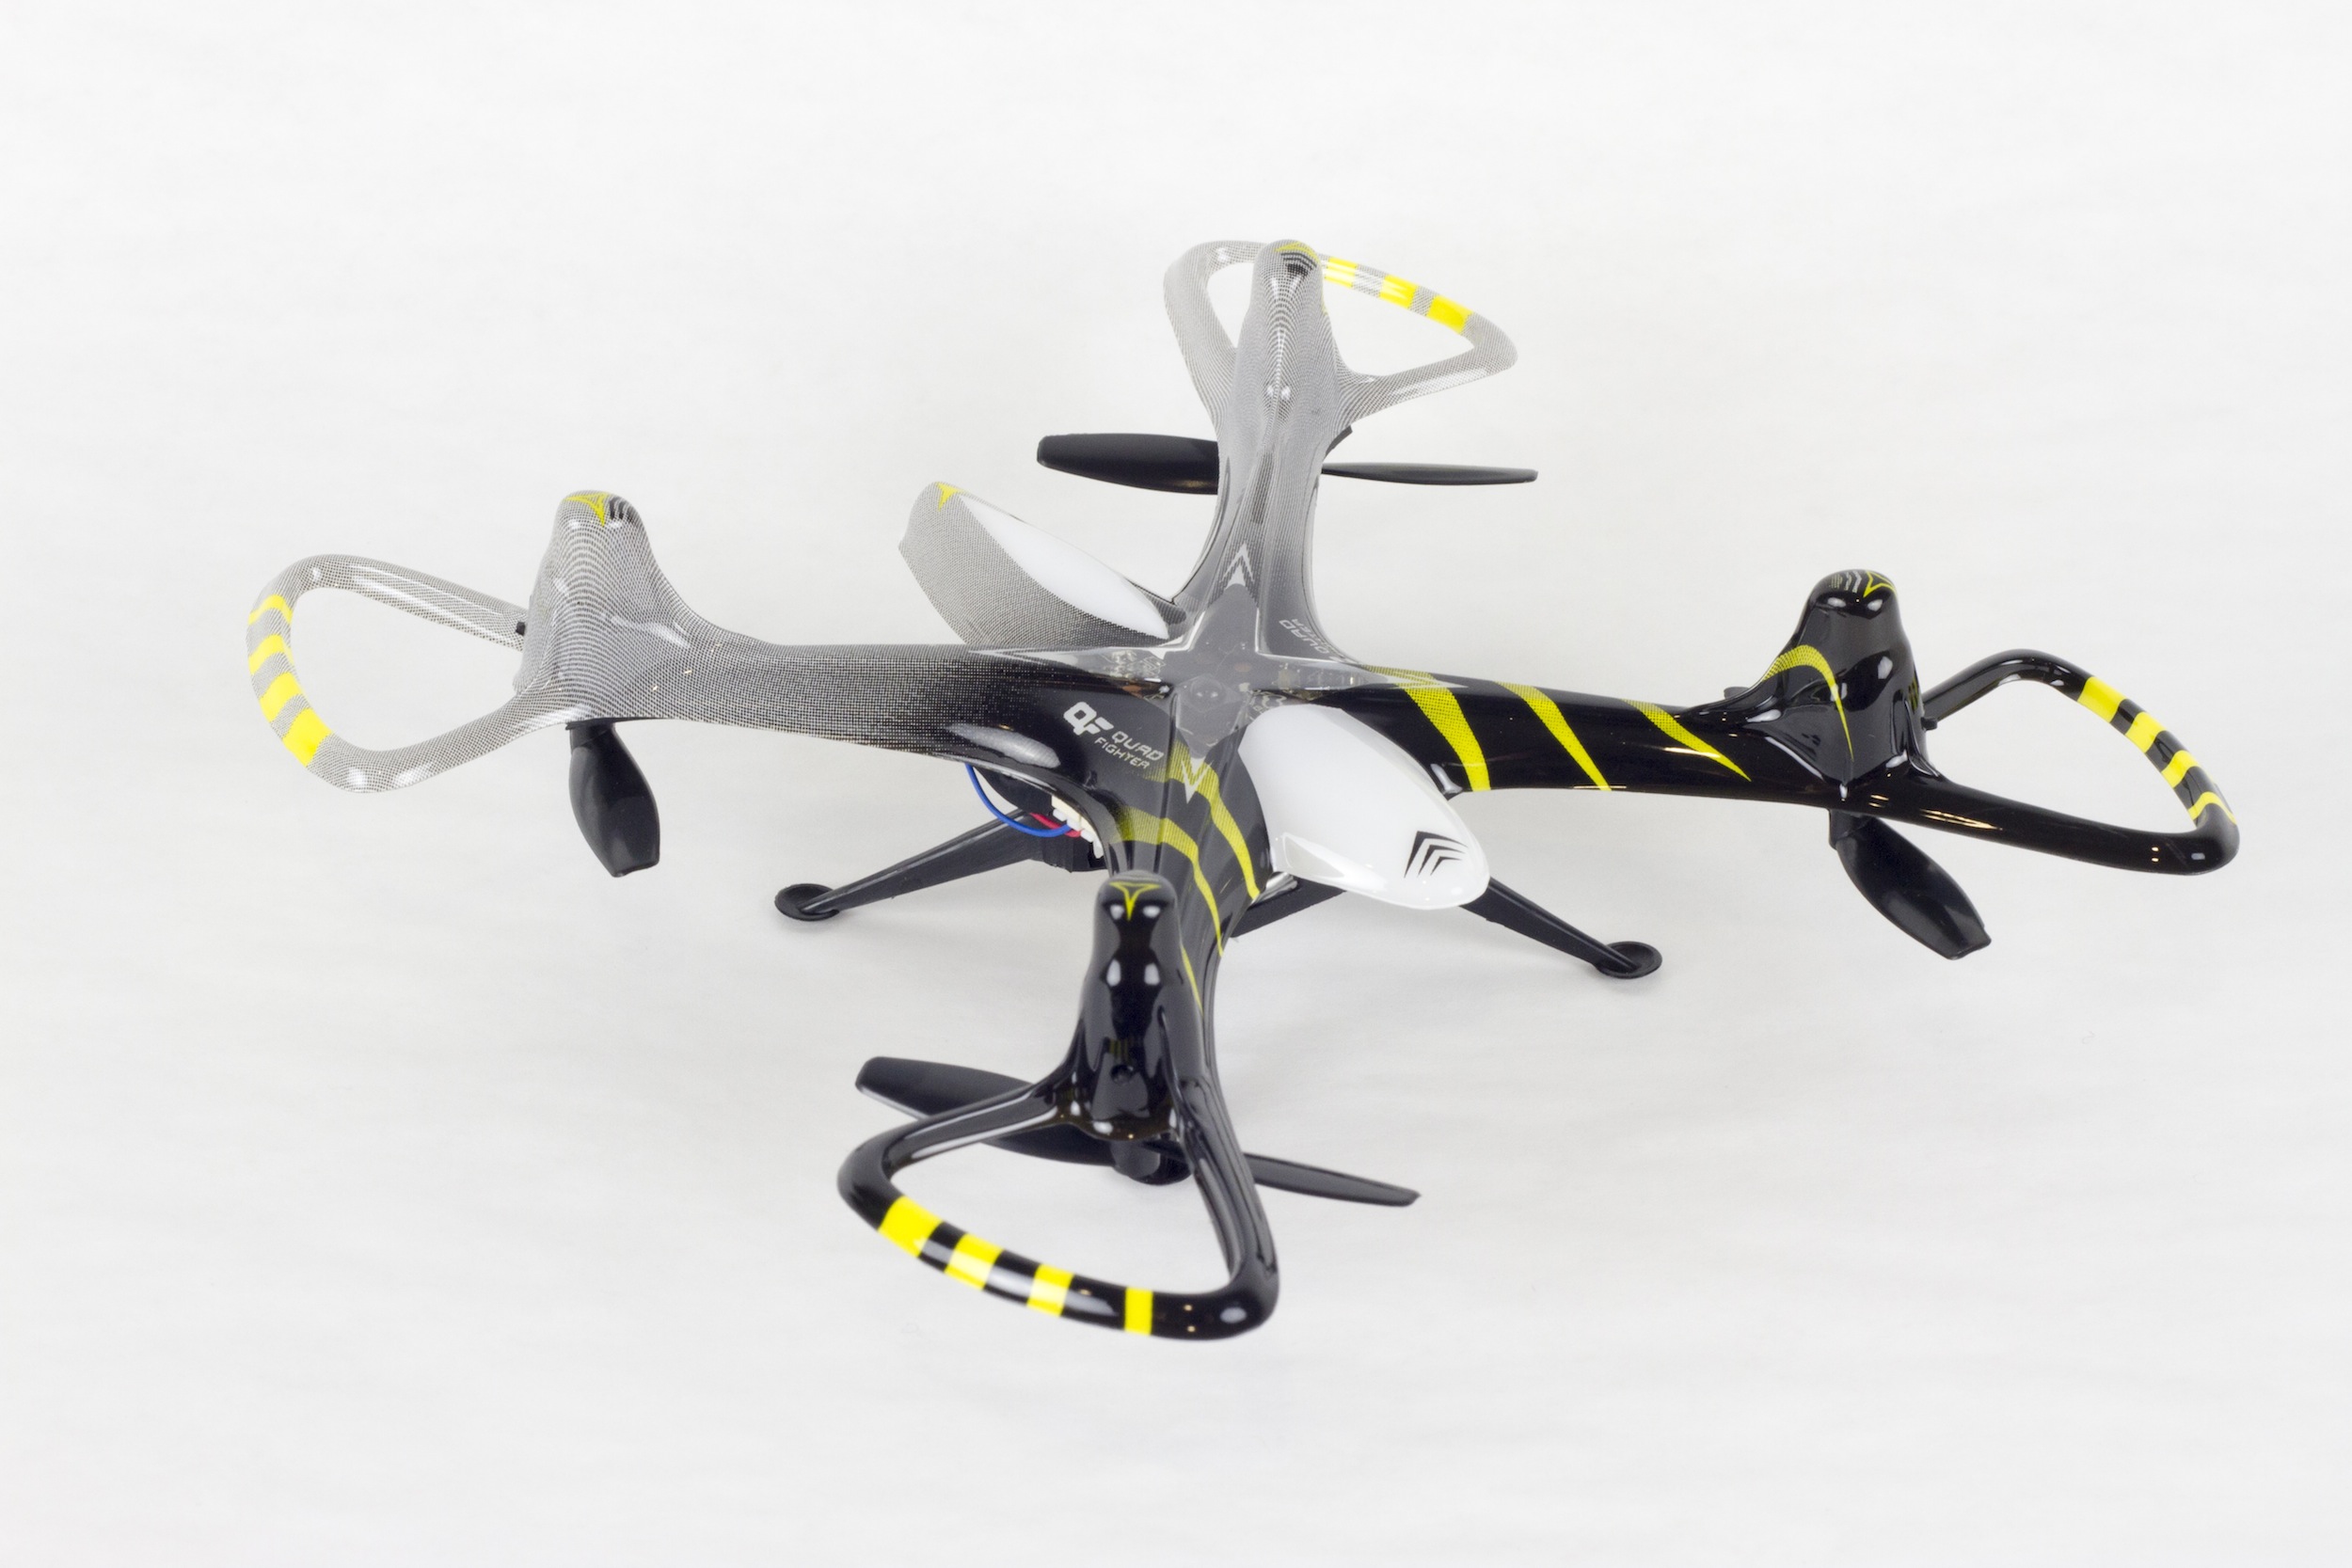 High-Tech Toy Drone Startup Gets Surprise National TV Exposure from Senator Rand Paul